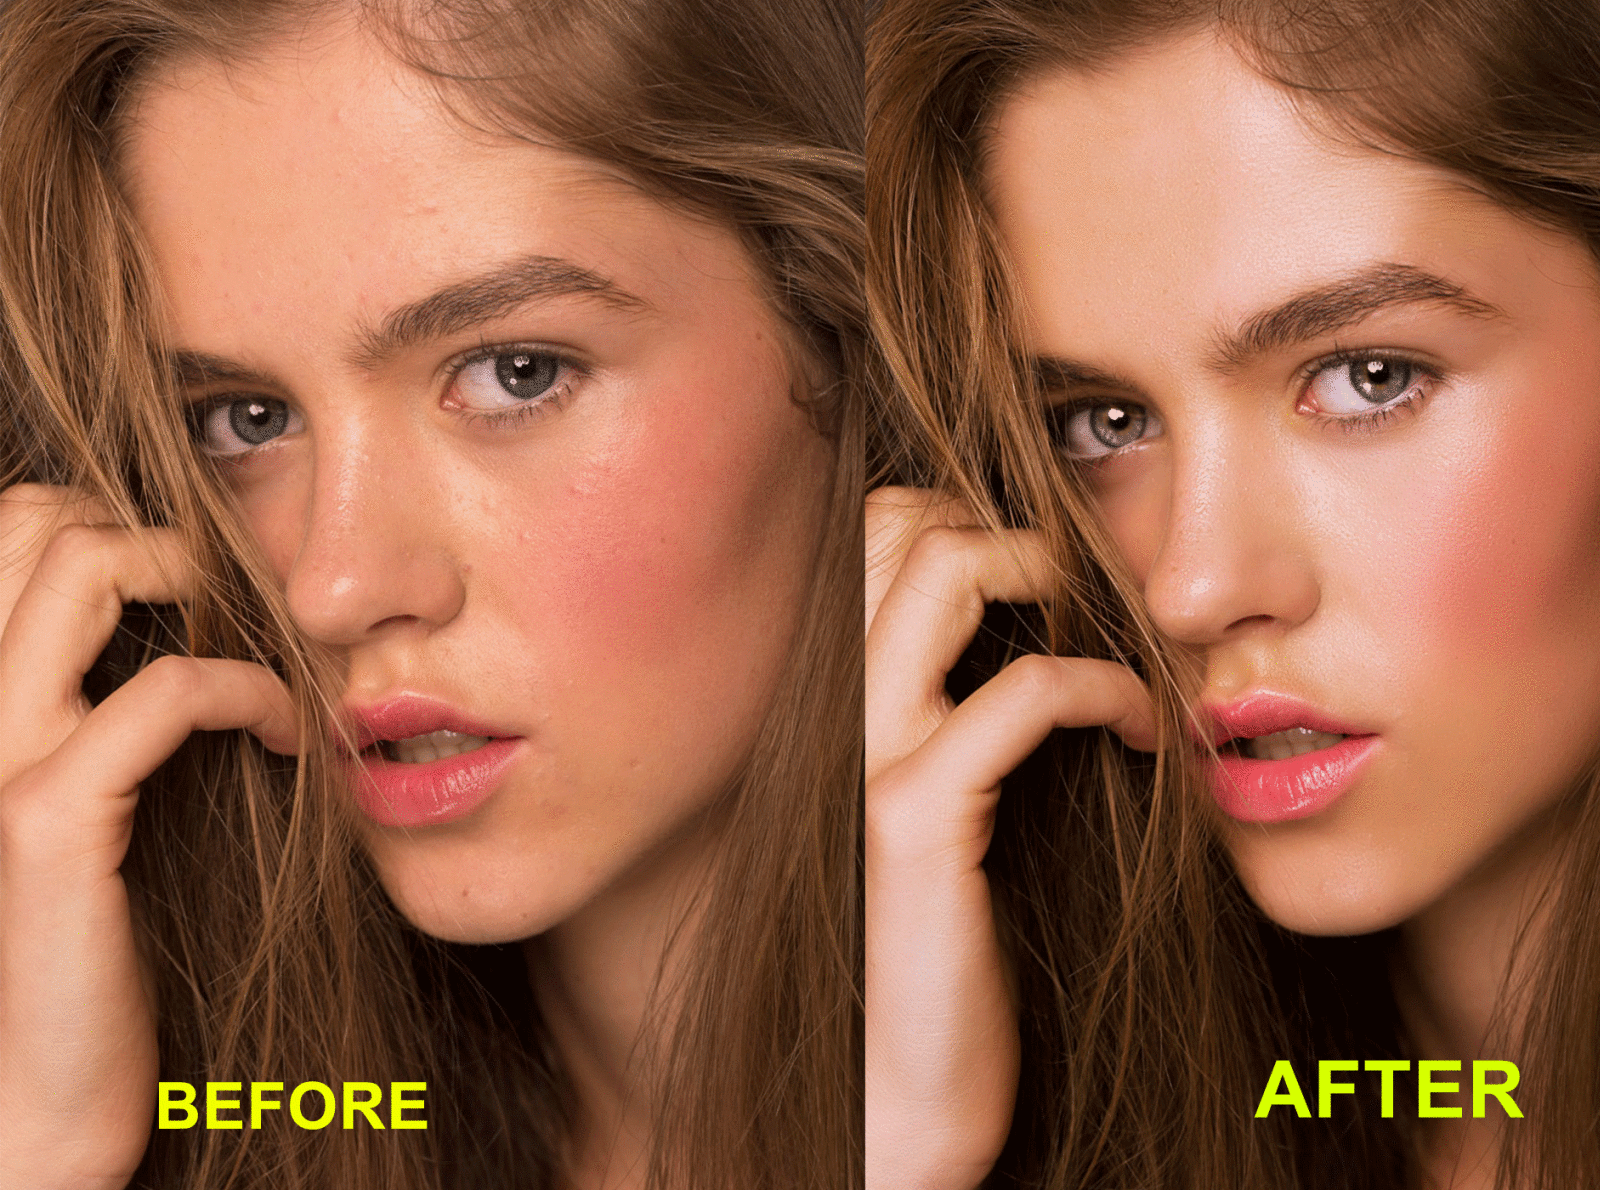 Retouching services professionally animation background removal branding clippingpath design editing illustration photoshop product photo editing remove background resizing web design